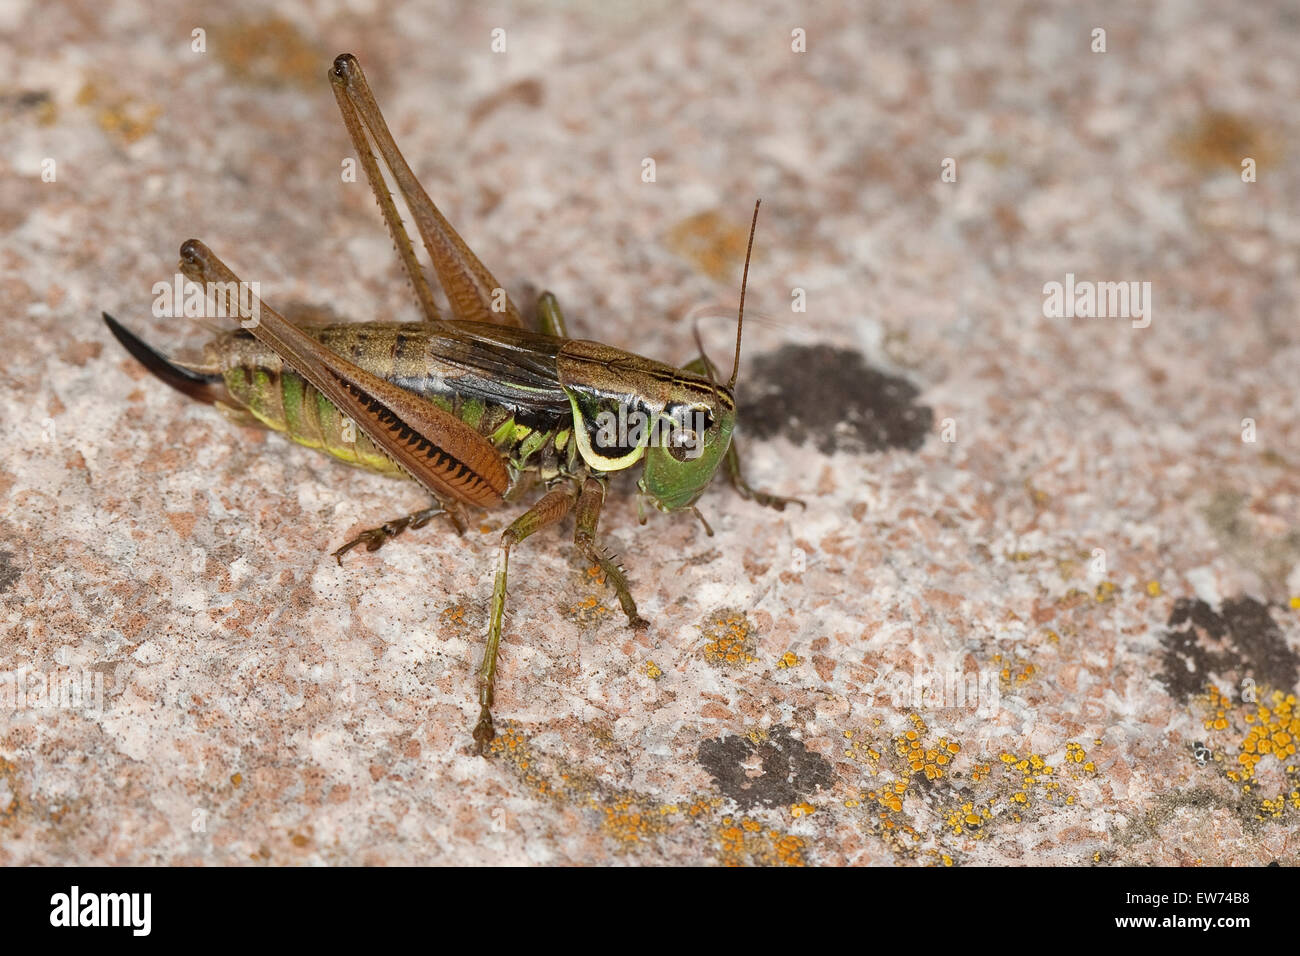 Roesel's bush cricket, Roesels Rösels Beißschrecke Beißschrecke, Roesels Beissschrecke, Weibchen, Metrioptera roeselii, Banque D'Images